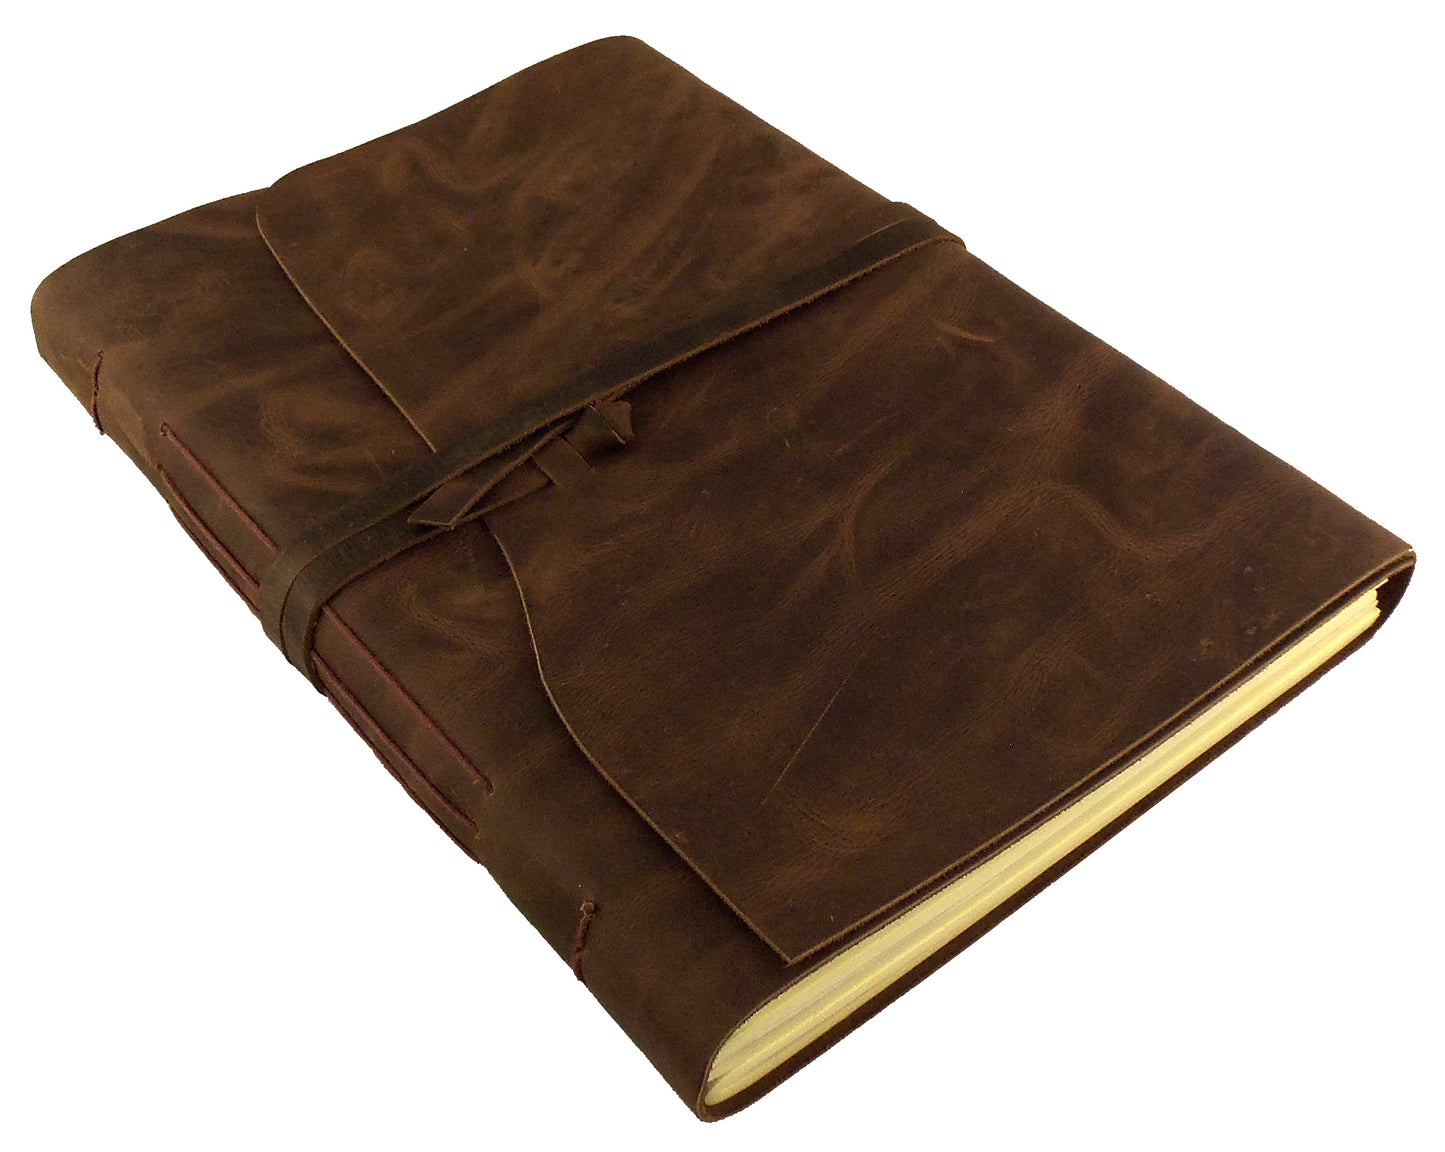 Large Genuine Leather Journal/Sketchbook with Gift Box - 380 Pages - 9" x 12" - Rustic Vintage Style - Rustic Ridge Leather